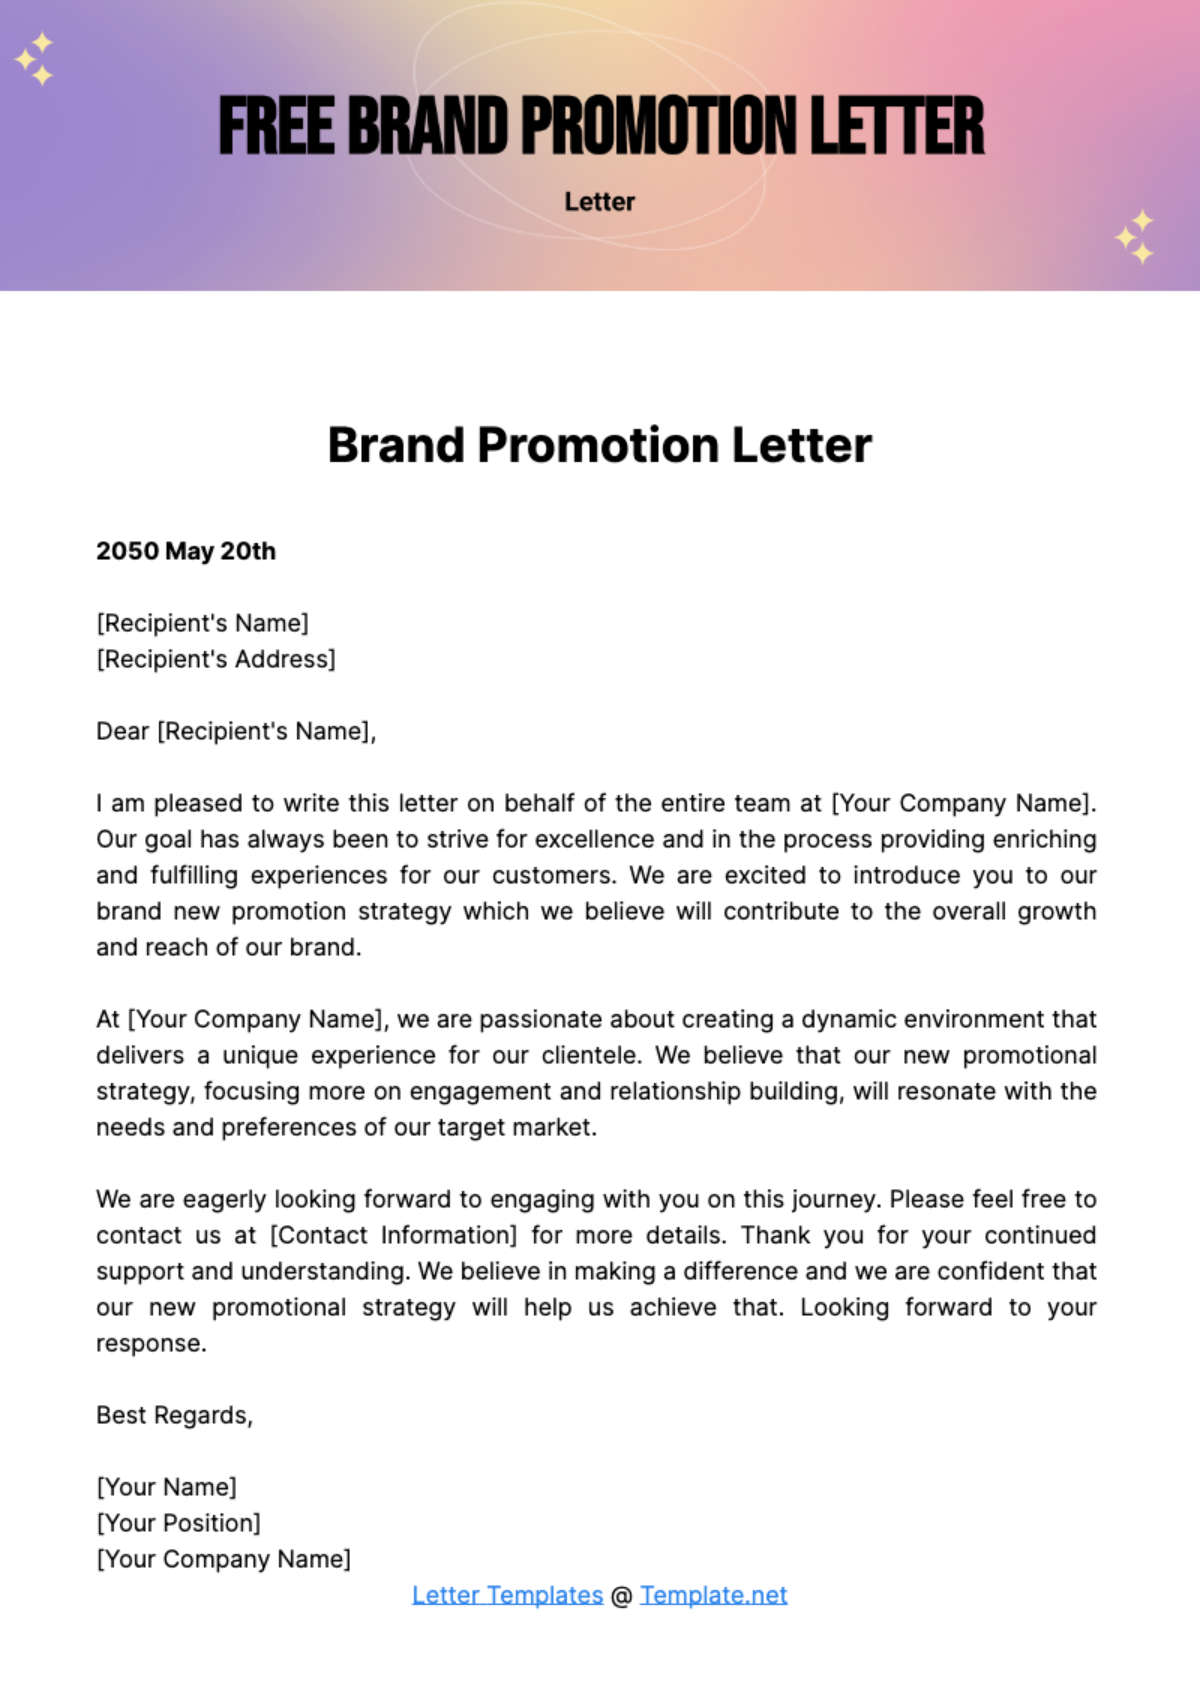 Brand Promotion Letter Template